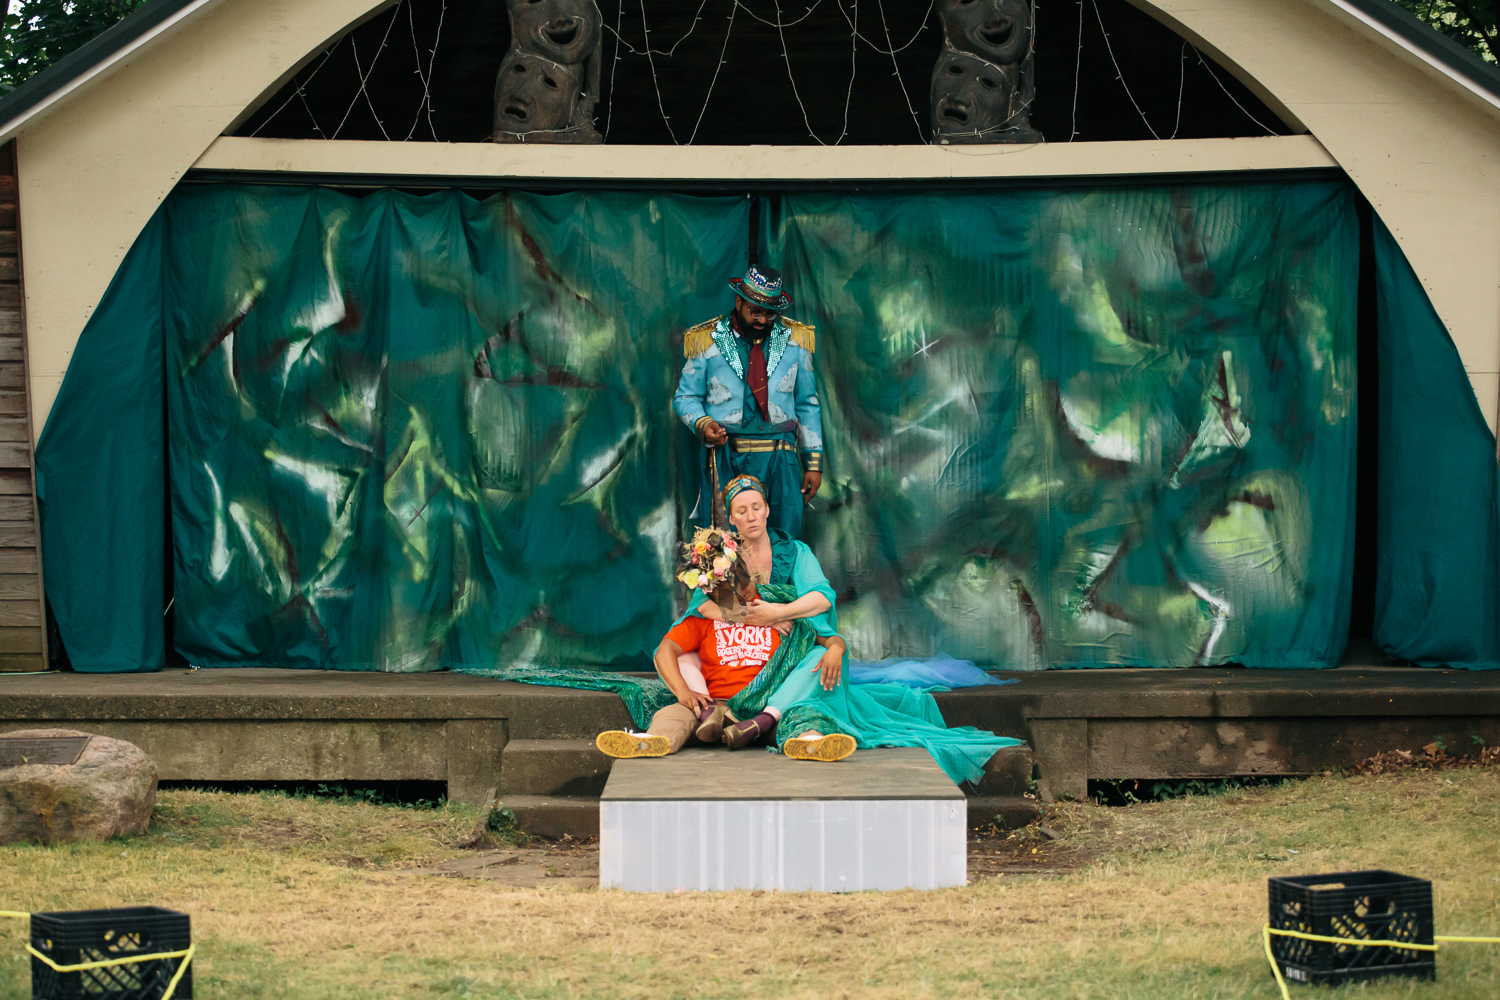 Three performers in costumes stand in the middle of a raised wooden stage with a green backdrop